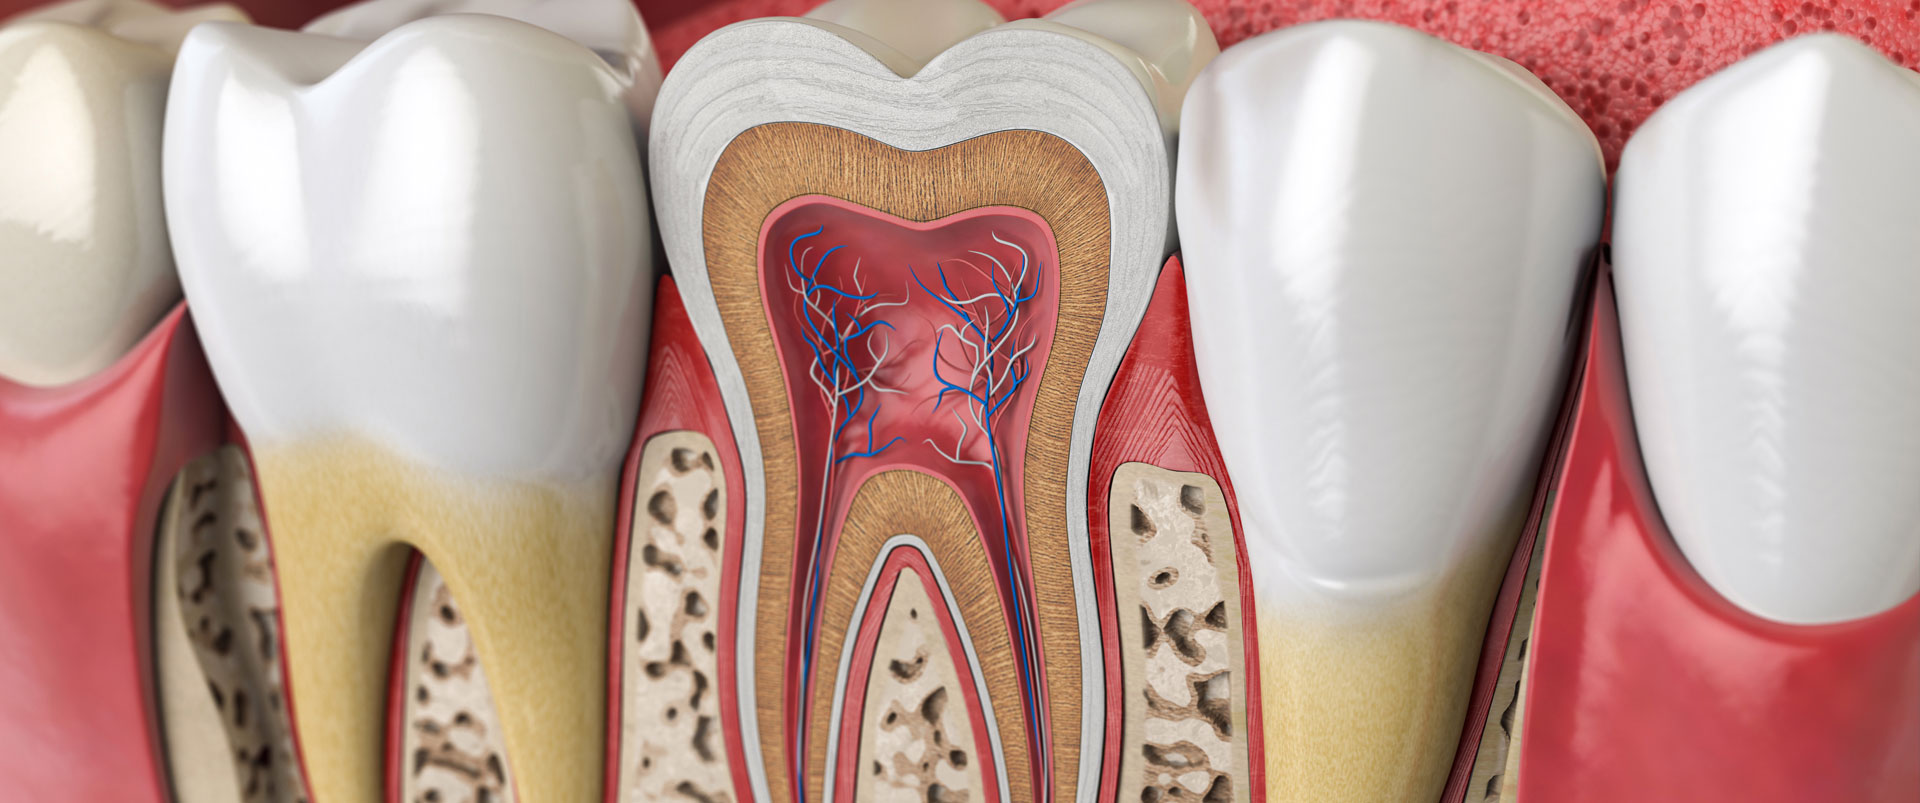 Root Canal | Fort Worth Dentist | Thomas L. Phillips Jr., DDS